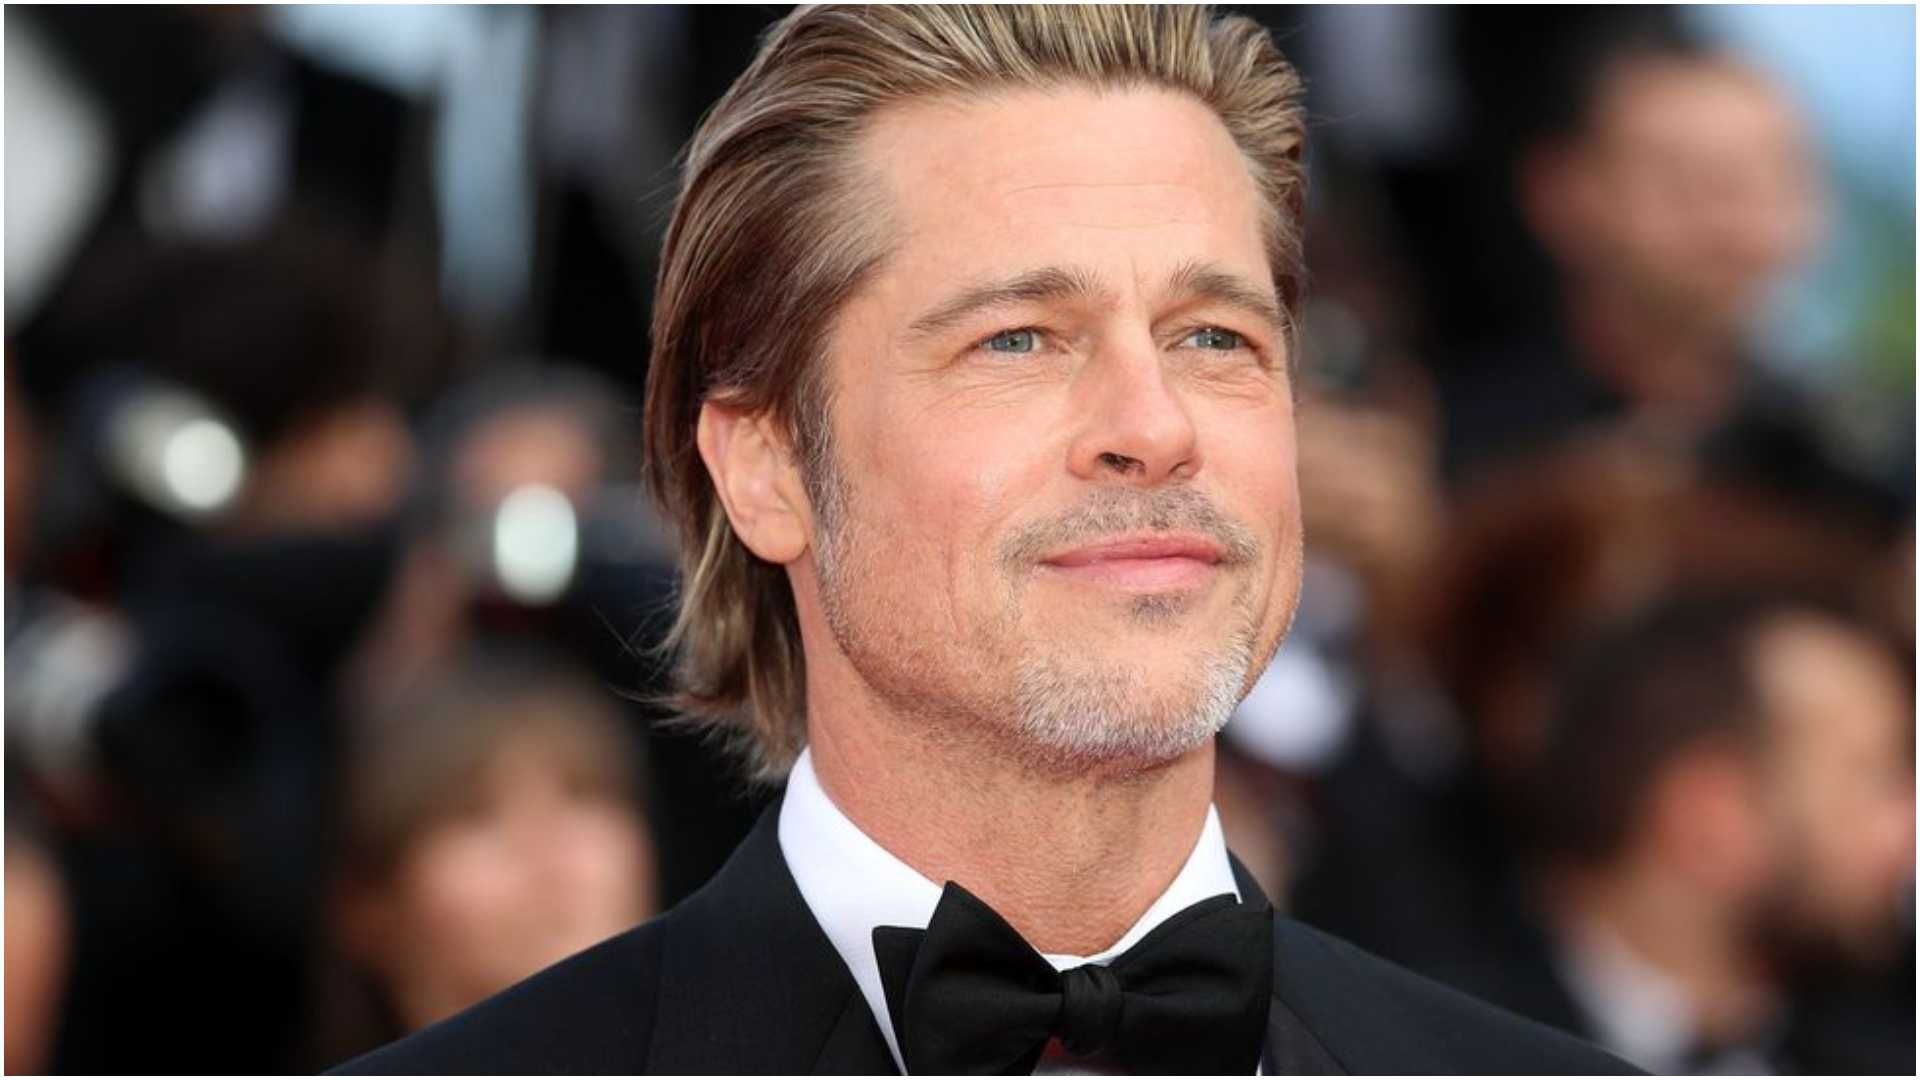 Behind the scenes of Brad Pitt's turbulent introduction to